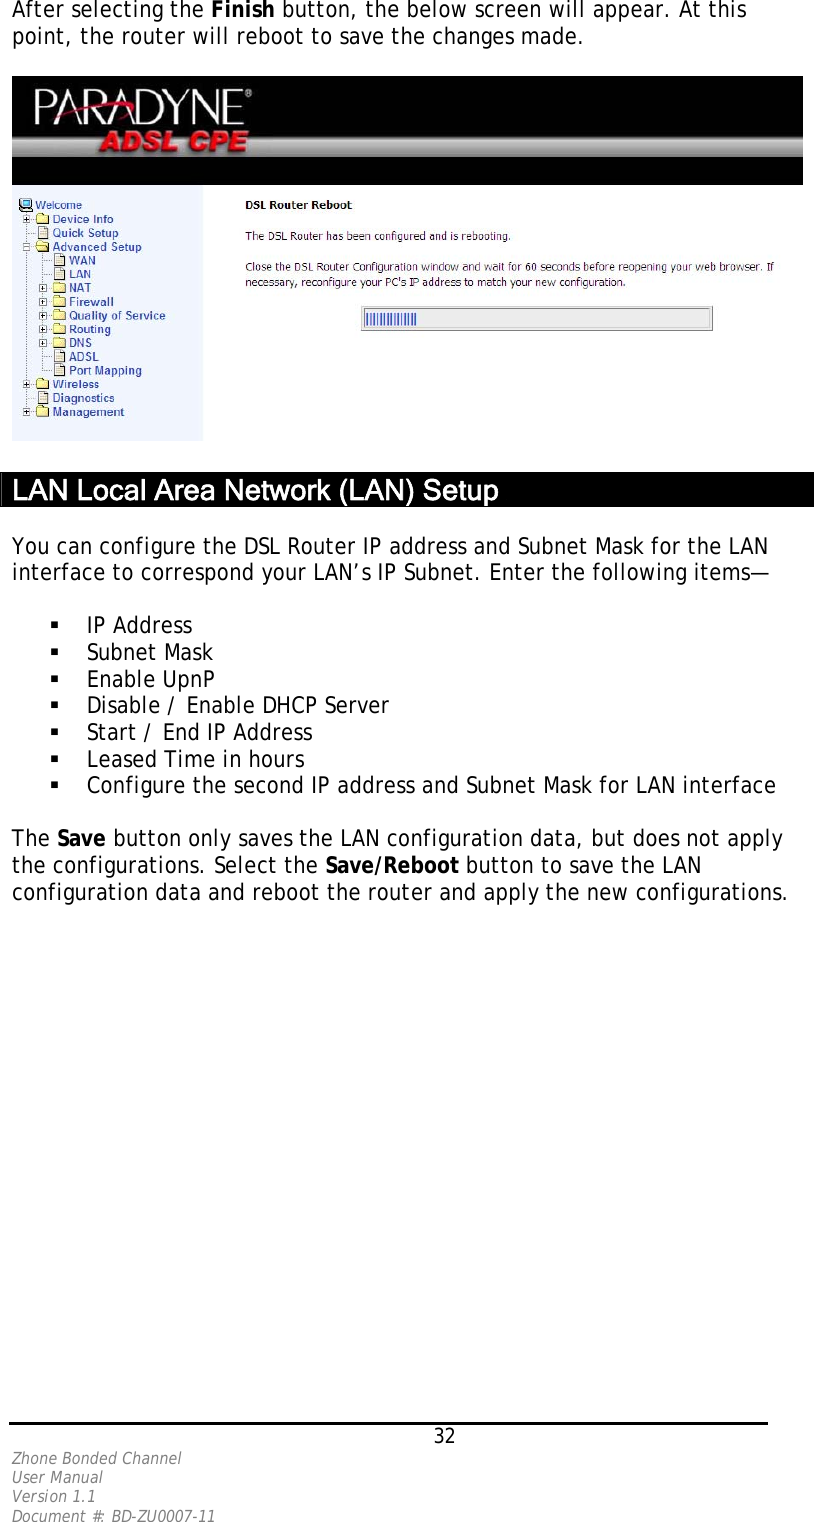 After selecting the Finish button, the below screen will appear. At this point, the router will reboot to save the changes made.     LAN Local Area Network (LAN) Setup   You can configure the DSL Router IP address and Subnet Mask for the LAN interface to correspond your LAN’s IP Subnet. Enter the following items—    IP Address   Subnet Mask   Enable UpnP   Disable / Enable DHCP Server   Start / End IP Address   Leased Time in hours   Configure the second IP address and Subnet Mask for LAN interface  The Save button only saves the LAN configuration data, but does not apply the configurations. Select the Save/Reboot button to save the LAN configuration data and reboot the router and apply the new configurations.    32 Zhone Bonded Channel User Manual  Version 1.1 Document #: BD-ZU0007-11 